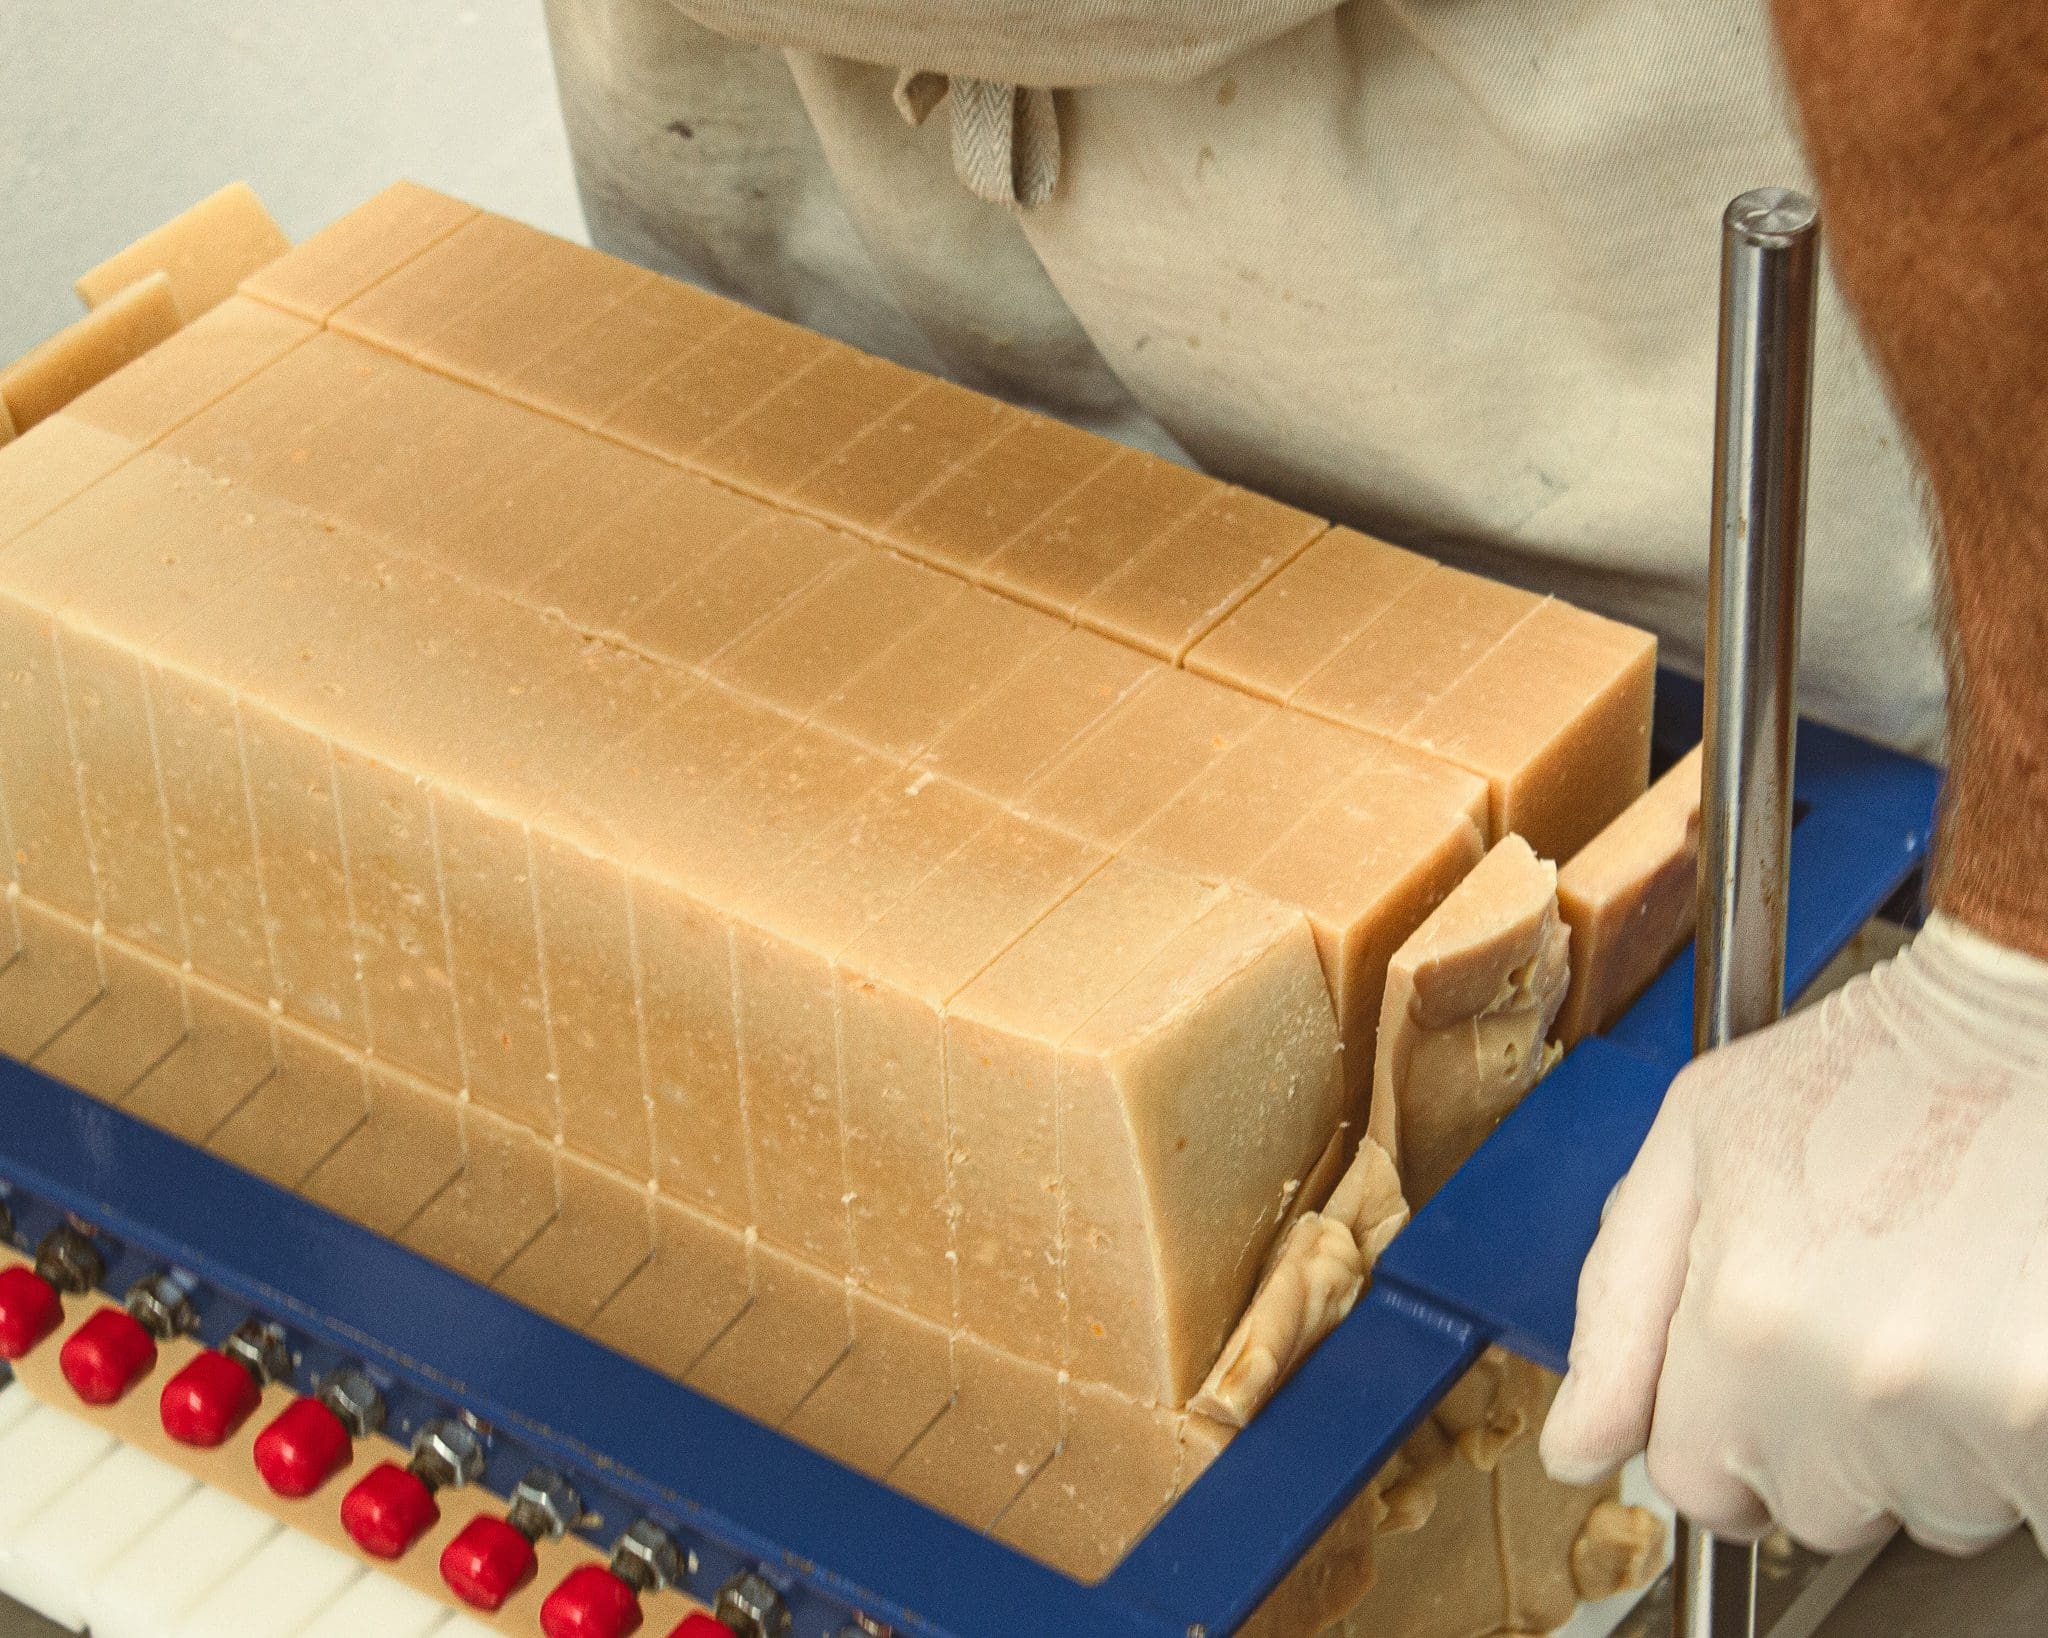 Man cutting through large block of soap to create smaller individual bars of soap